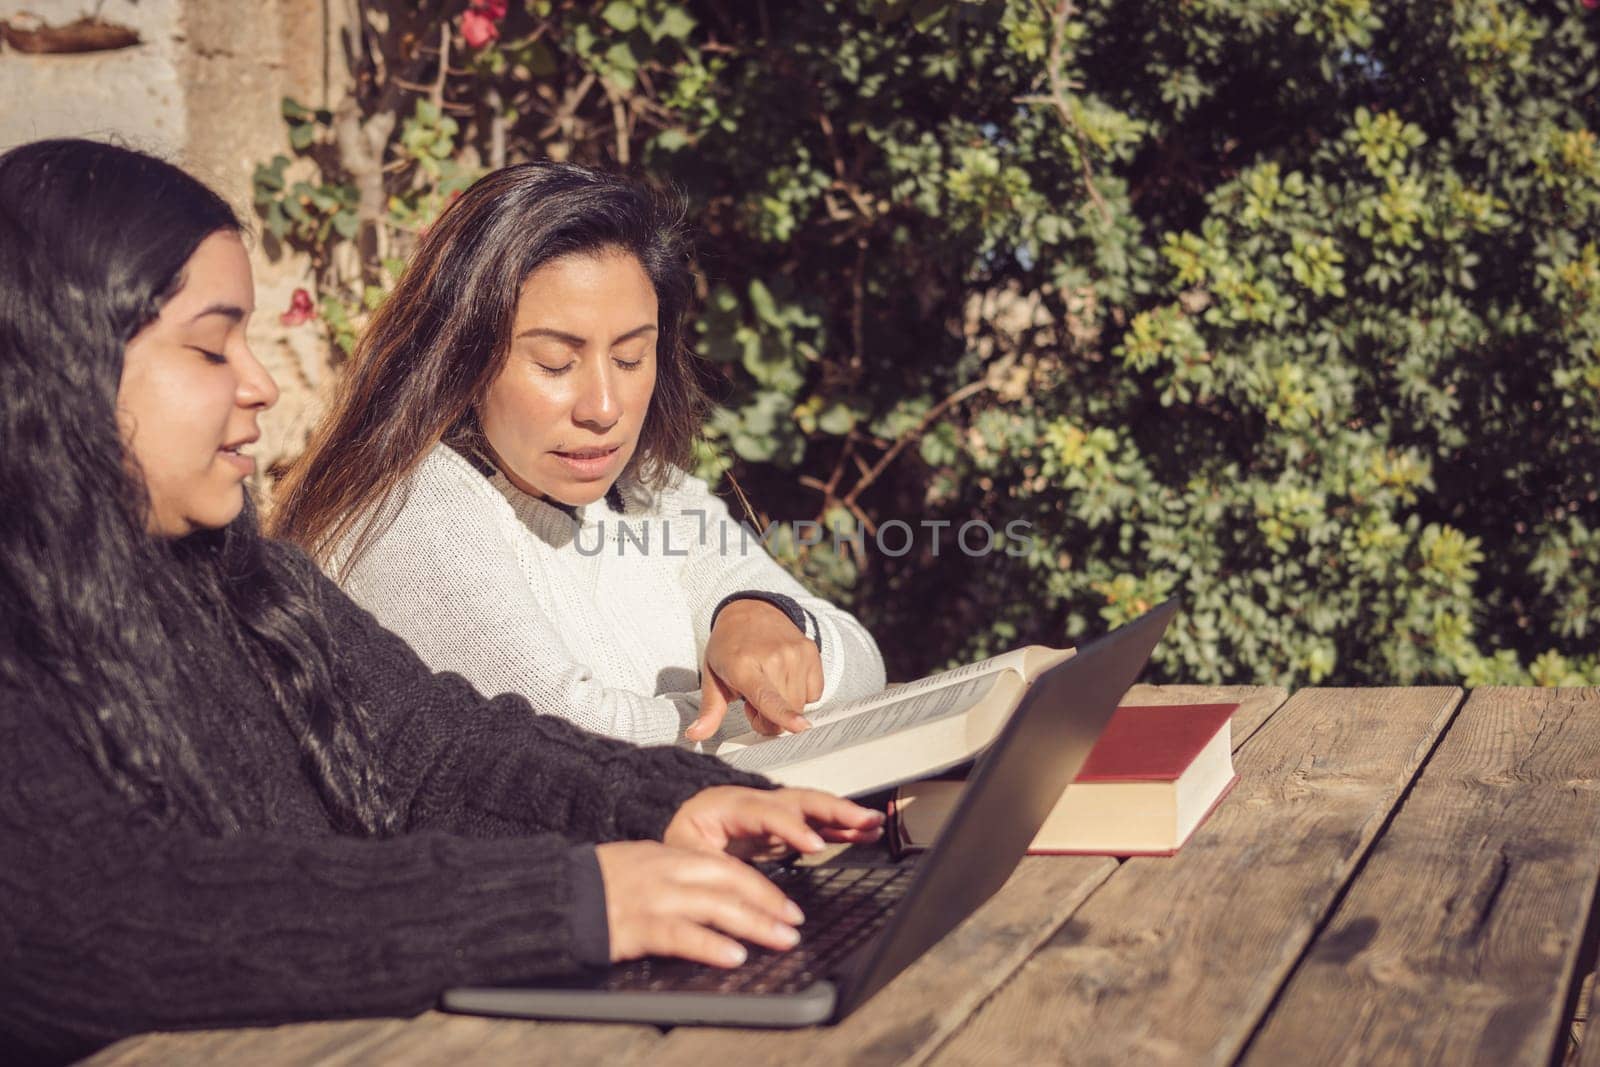 two latin women with long dark hair, working outdoors in the park with books and laptops, sitting at a wooden table with a natural green background.